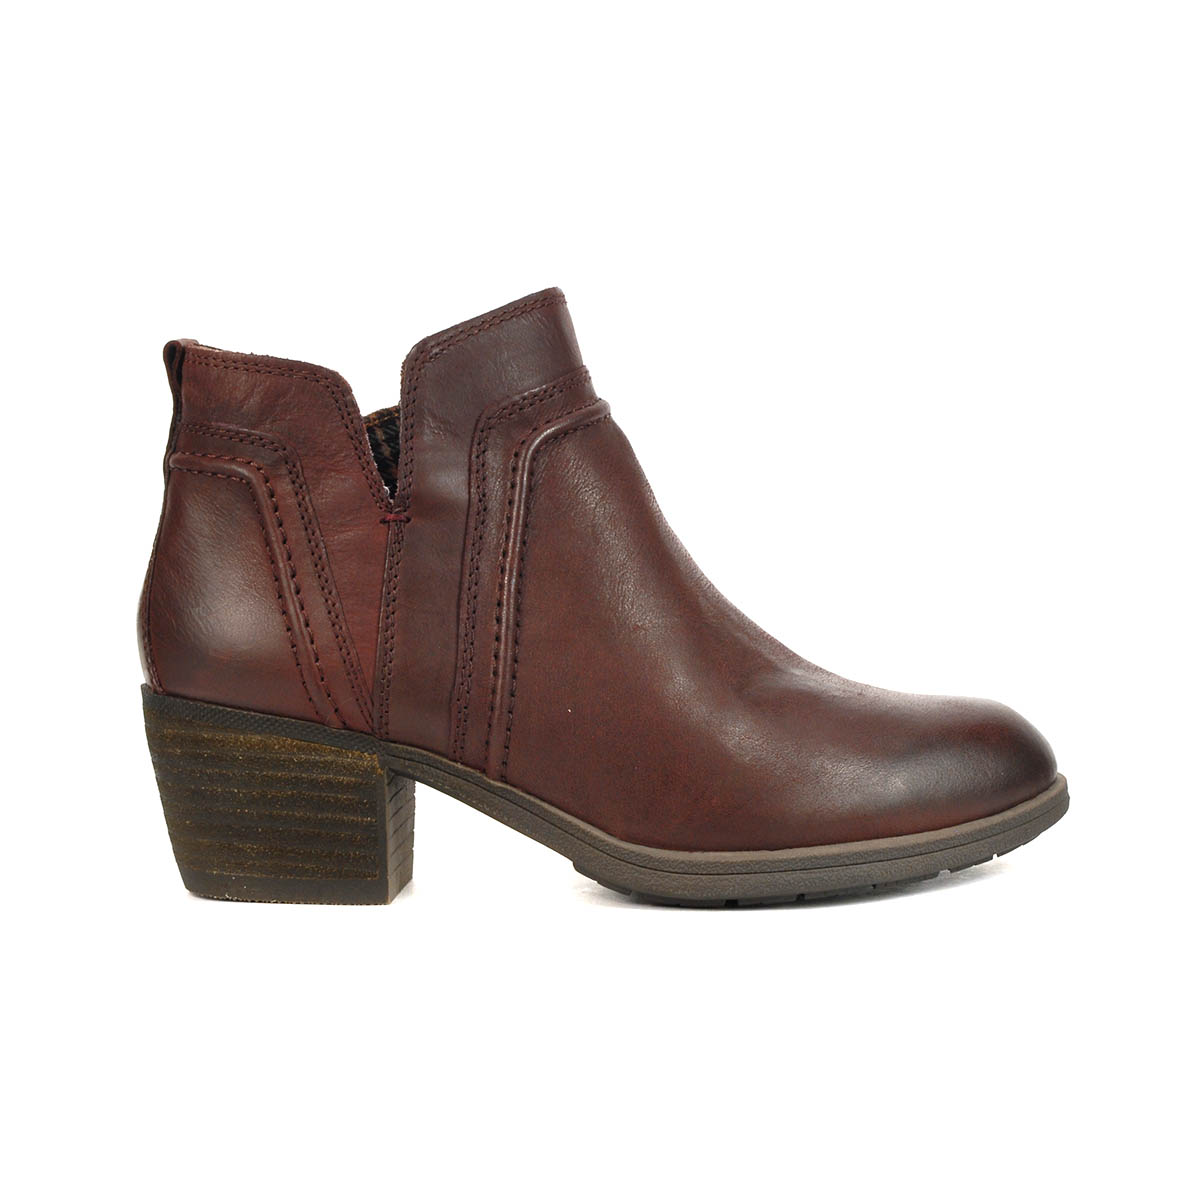 Rockport Cobb Hill Women's Anisa Vcut Burgundy Leather Booties CI1846